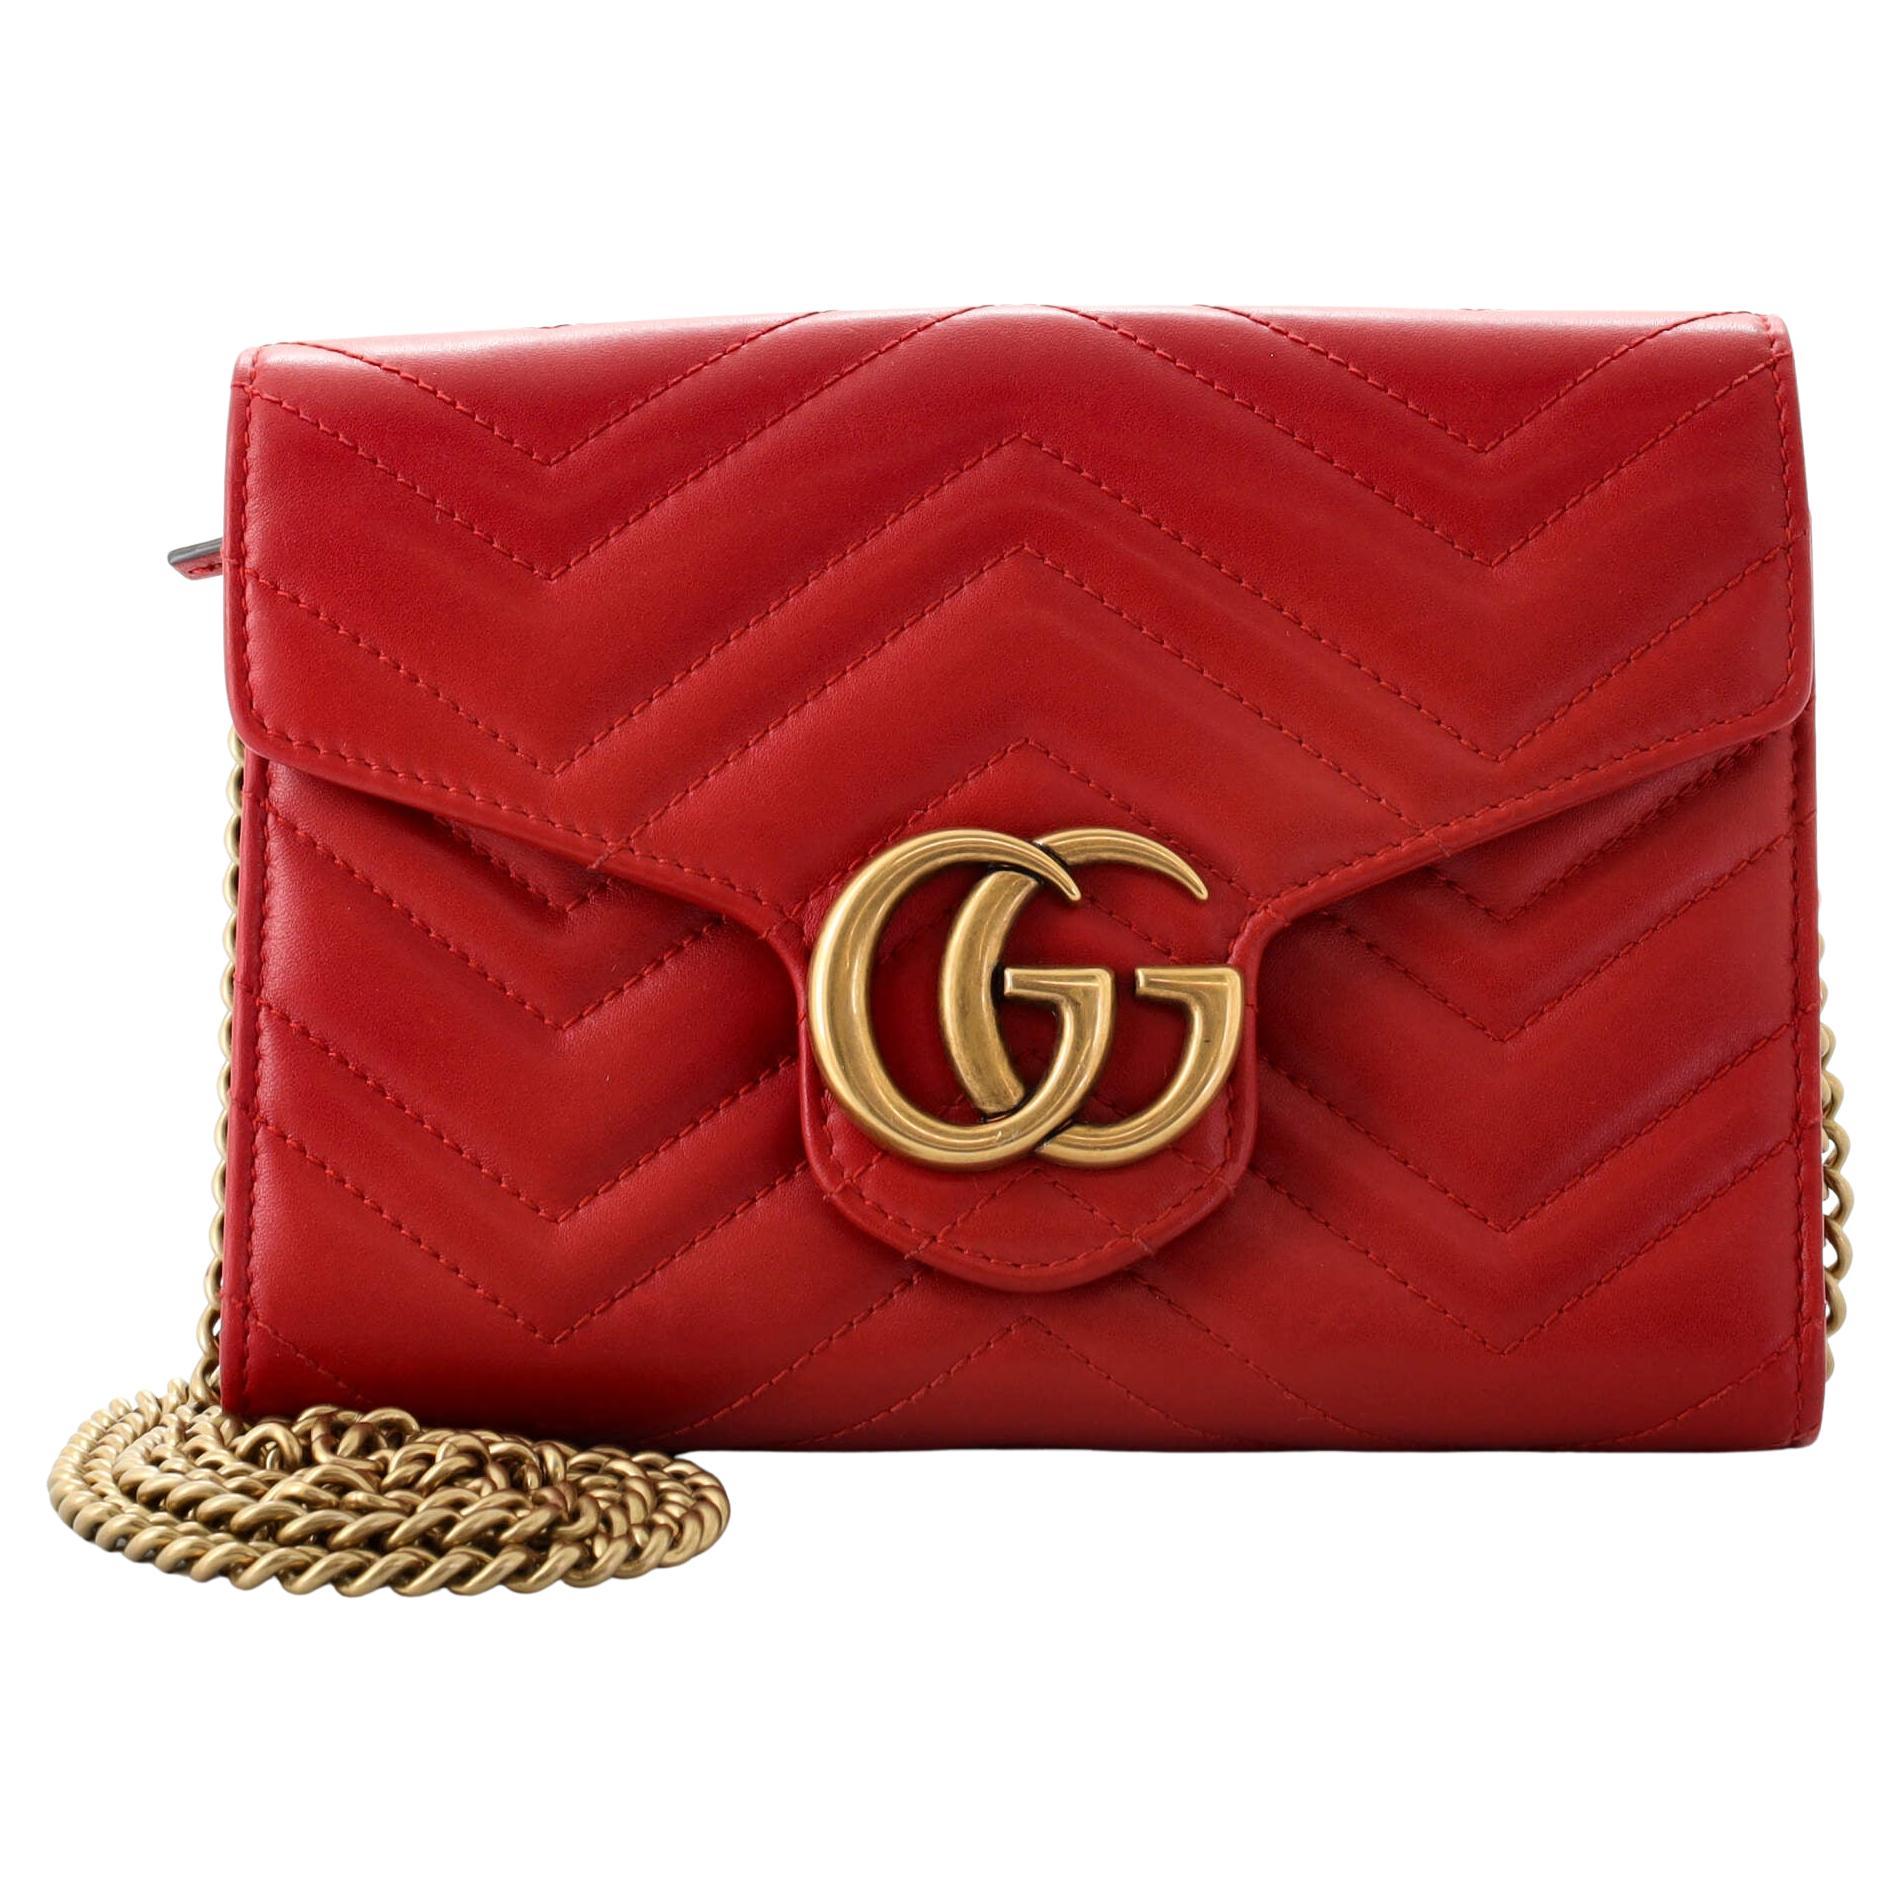 Gucci - Authenticated GG Marmont Chain Handbag - Leather Red Plain for Women, Never Worn